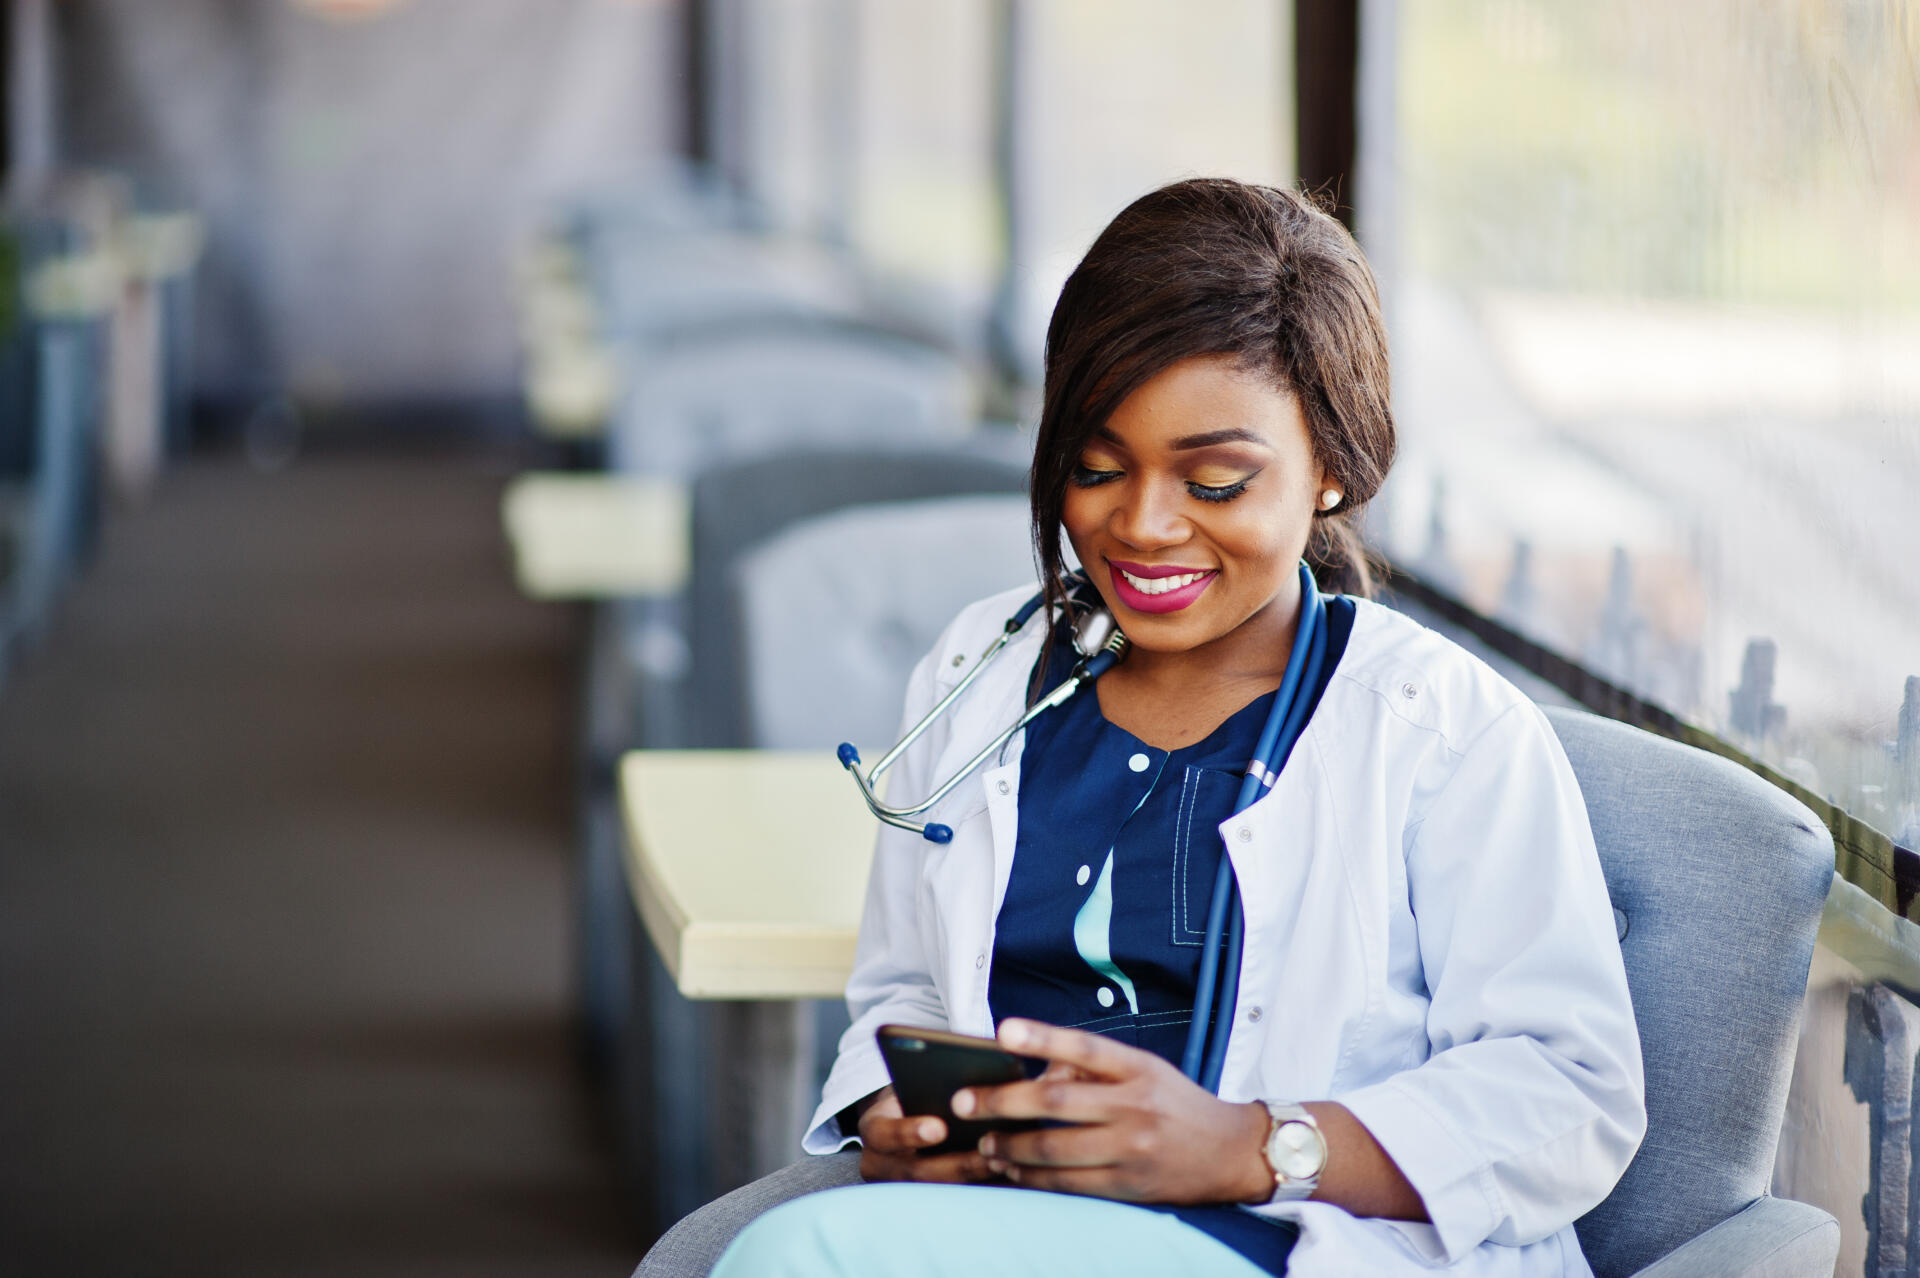 female doctor with stethoscope looking at phone